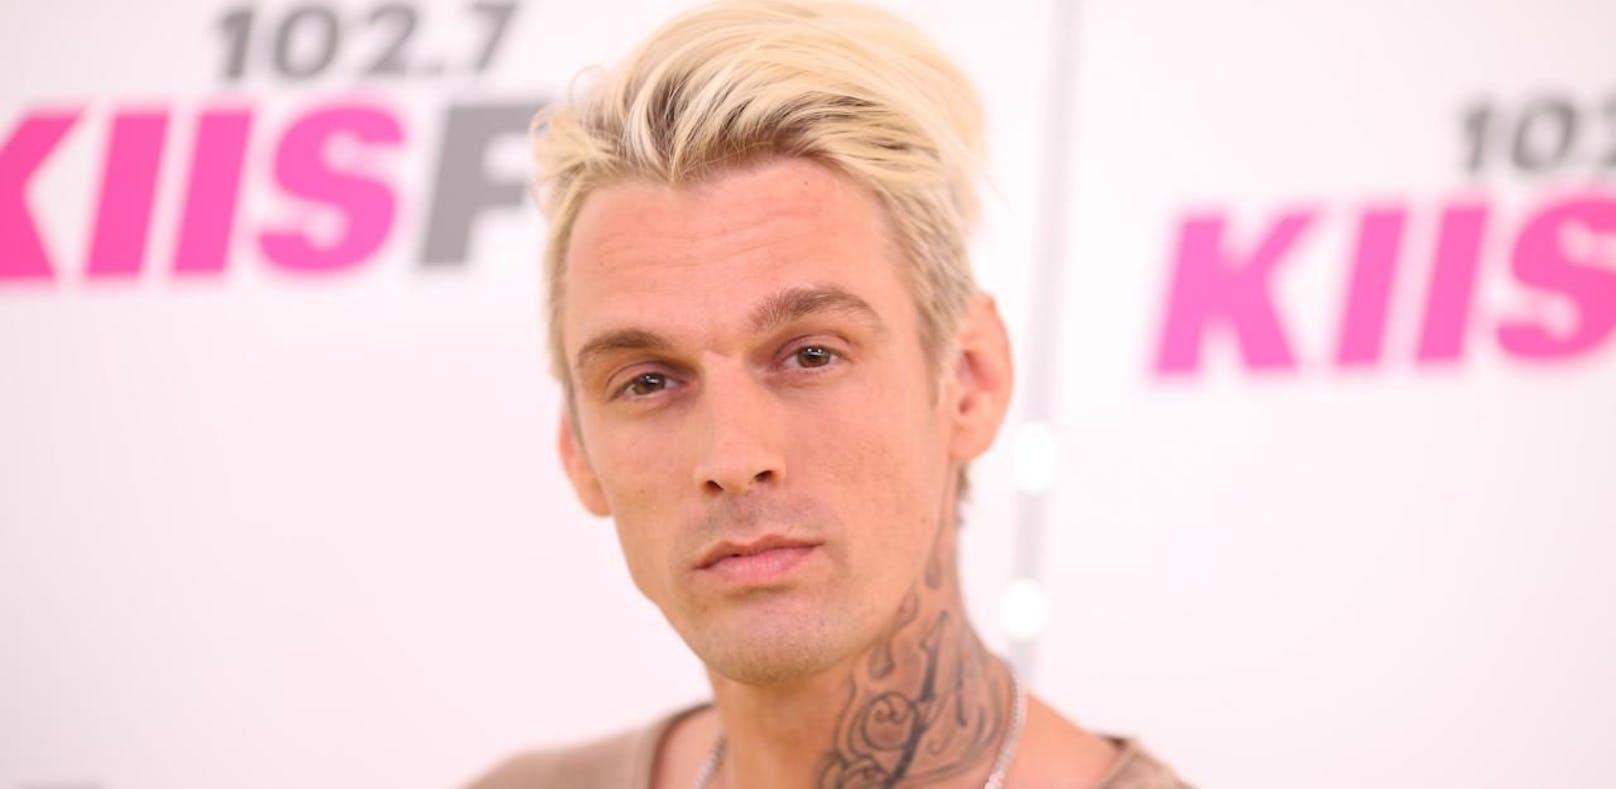 Aaron Carter: Droh-Anrufe und Hass-Mails